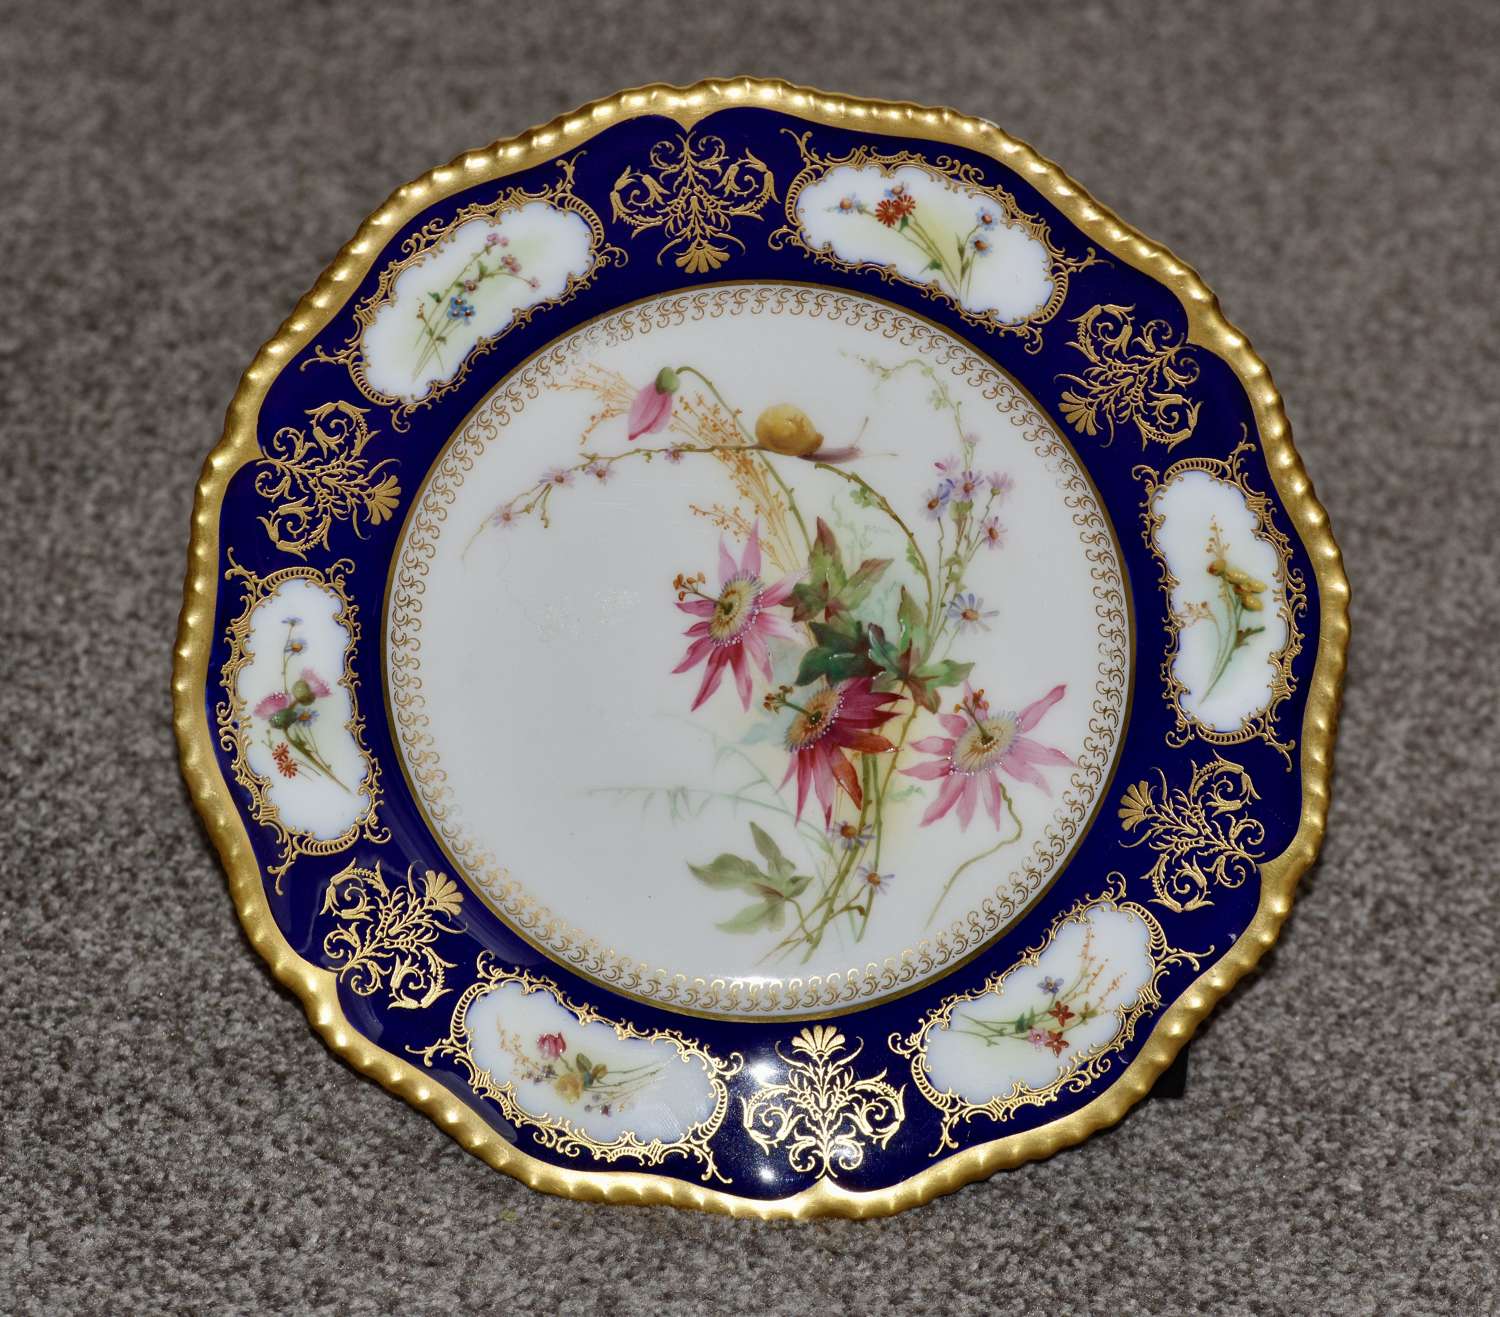 1904 Royal Worcester Plate with Spray Hand Painted Flowers and Snail